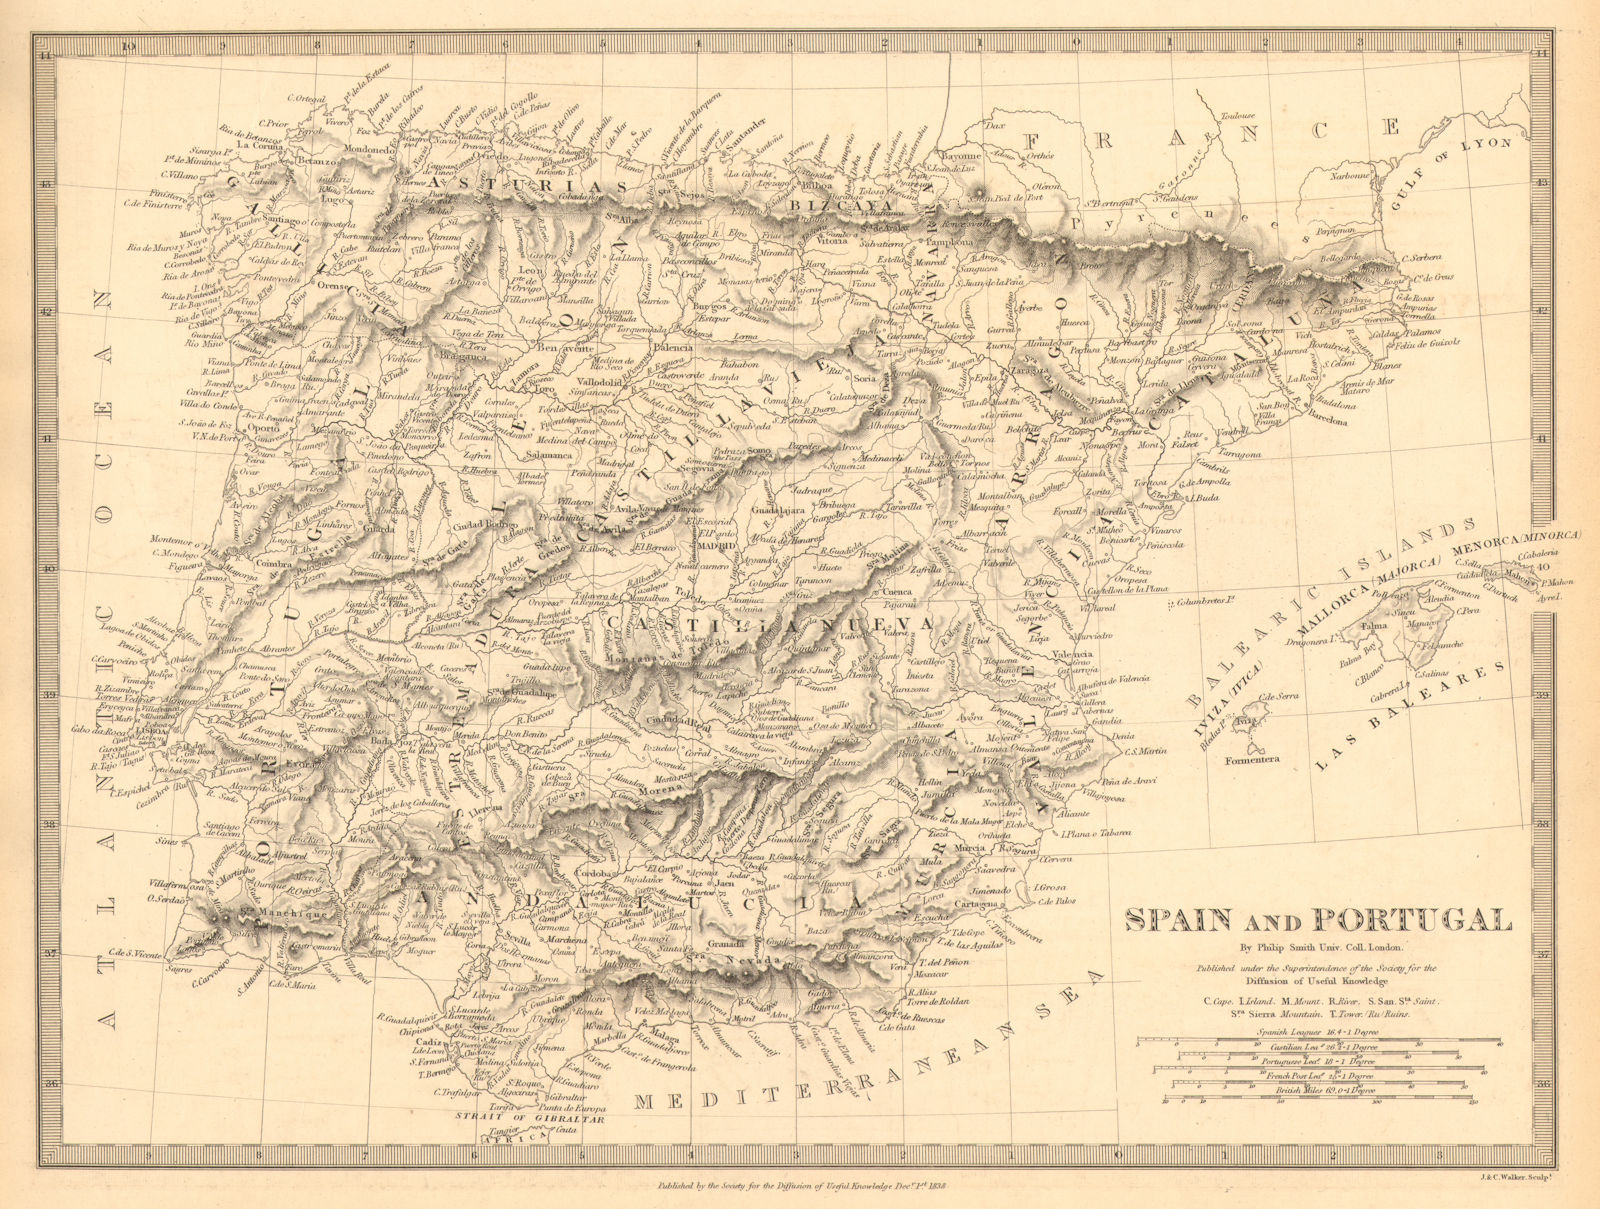 IBERIA. Spain and Portugal showing provinces. SDUK 1848 old antique map chart